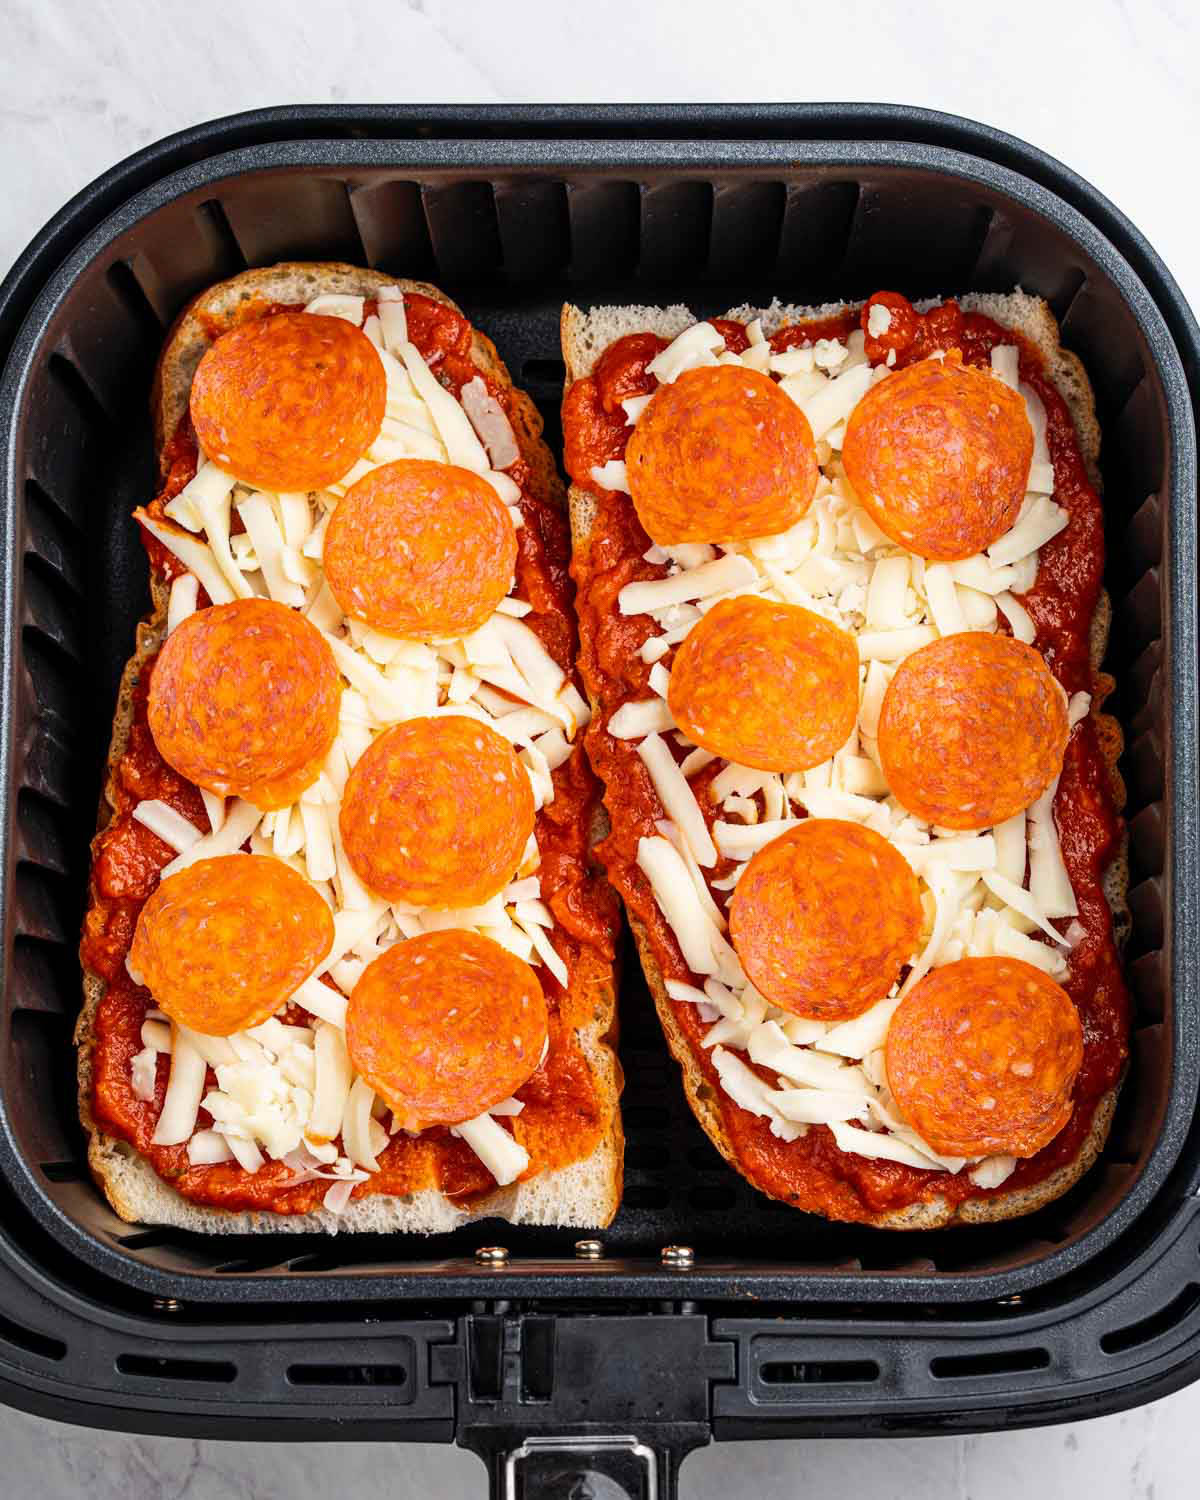 Two uncooked french bread pizzas are situated in an air fryer. 